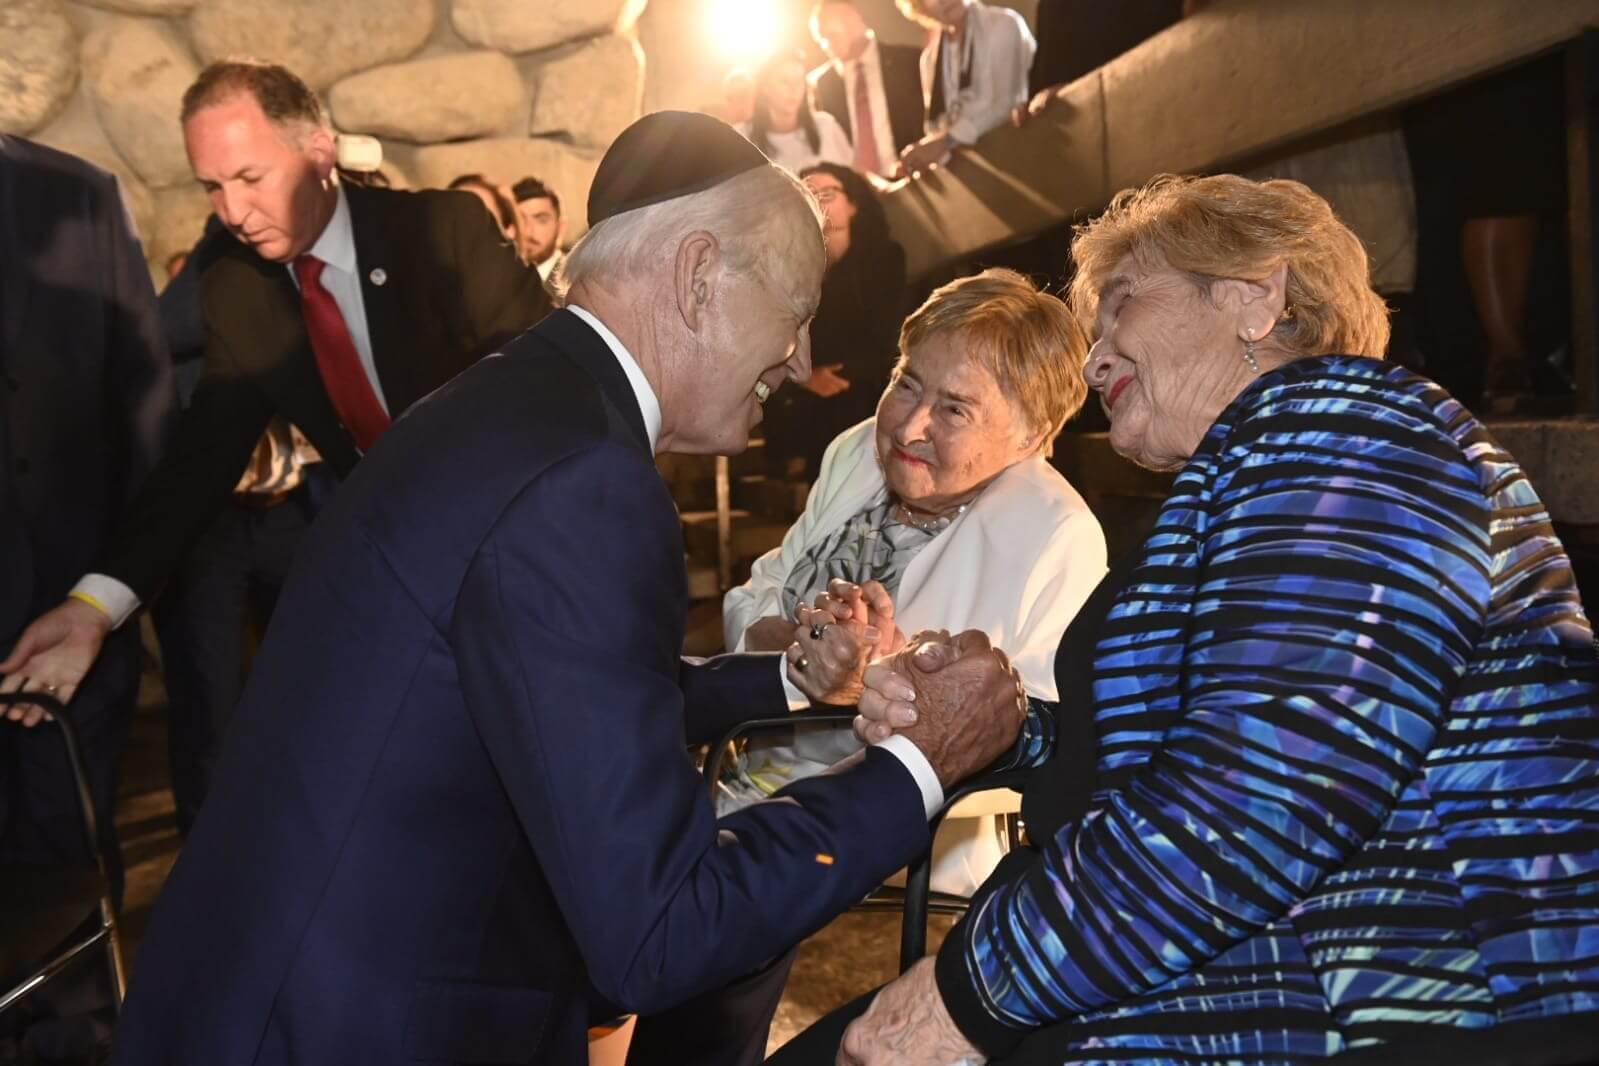 President Biden met at Yad Vashem with two Holocaust survivors, Rena Quint (left) and Giselle Cycowicz. 